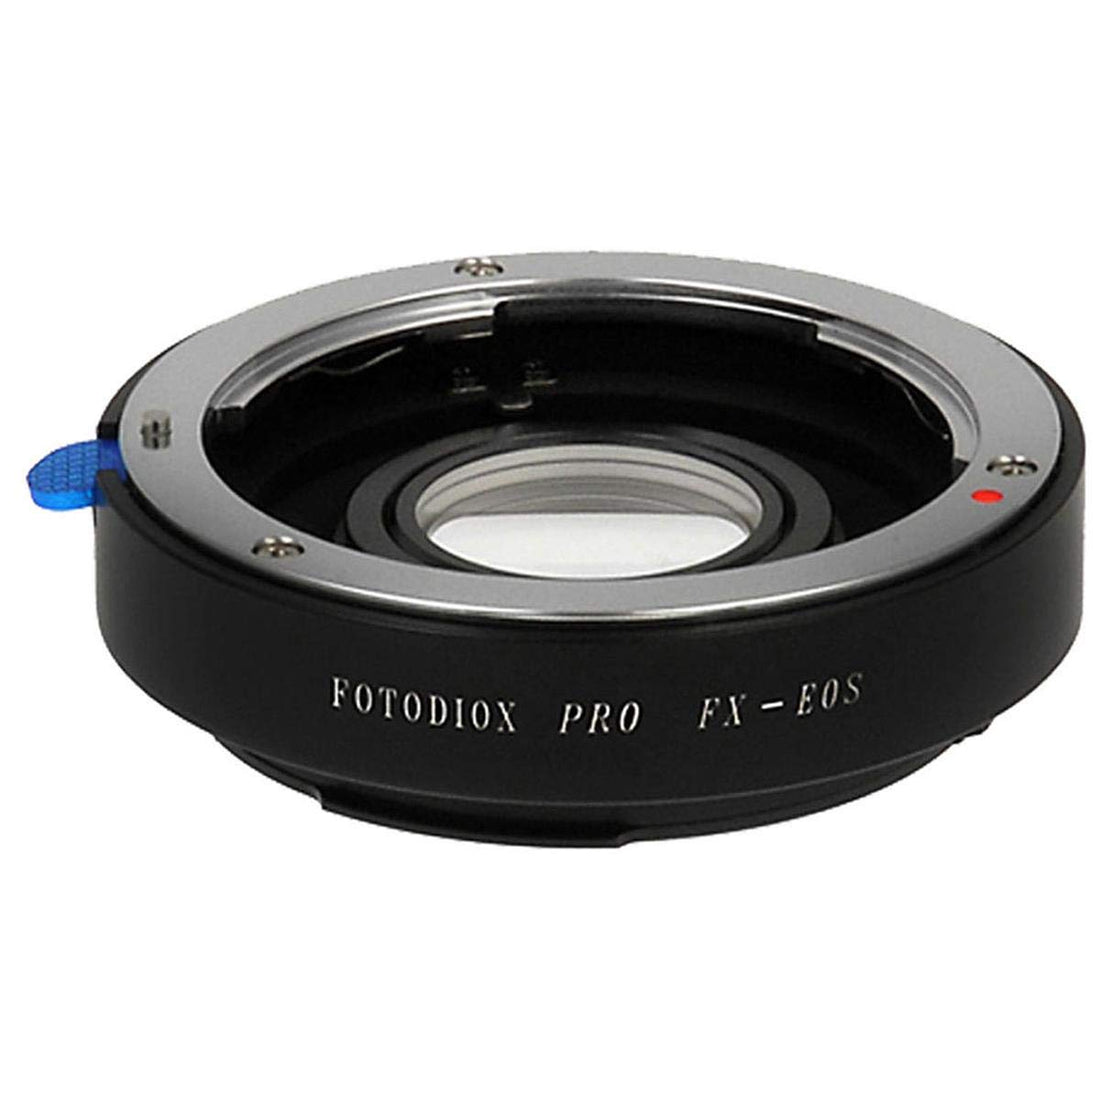 Fotodiox Pro Lens Mount Adapter Compatible with Fuji Fujica X-Mount 35mm (FX35) SLR Lens to Canon EOS (EF, EF-S) Mount D/SLR Camera Body - with Gen10 Focus Confirmation Chip